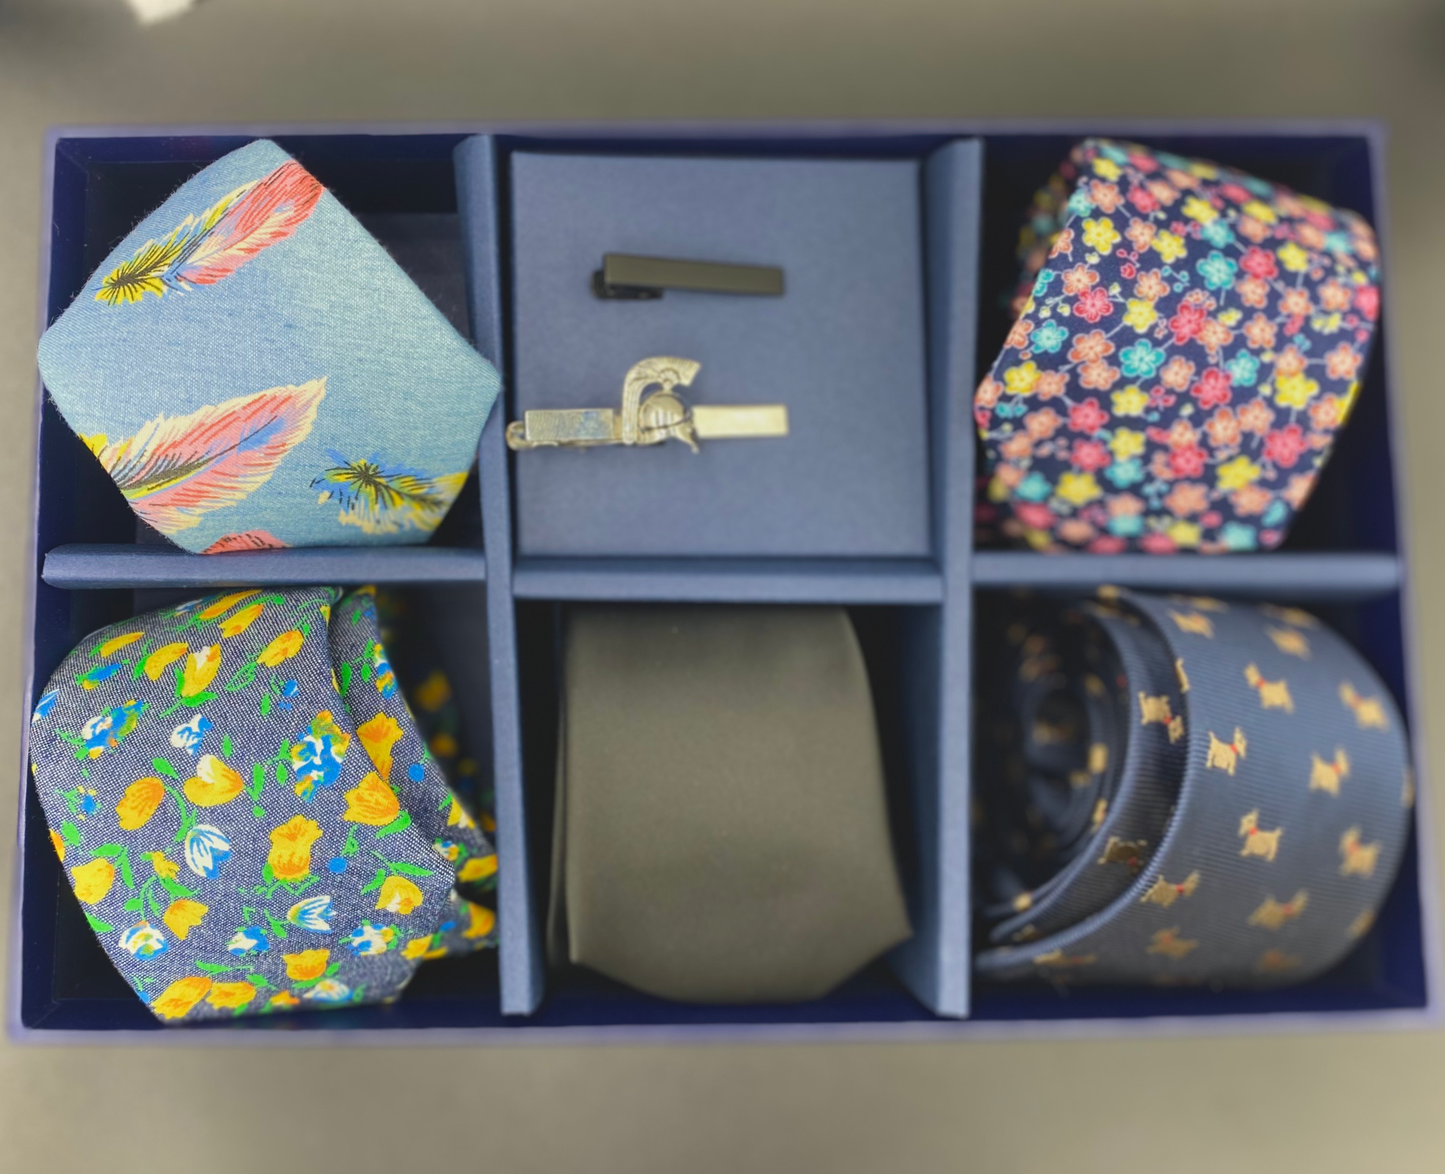 Summertime Tie Assortment and Accessories